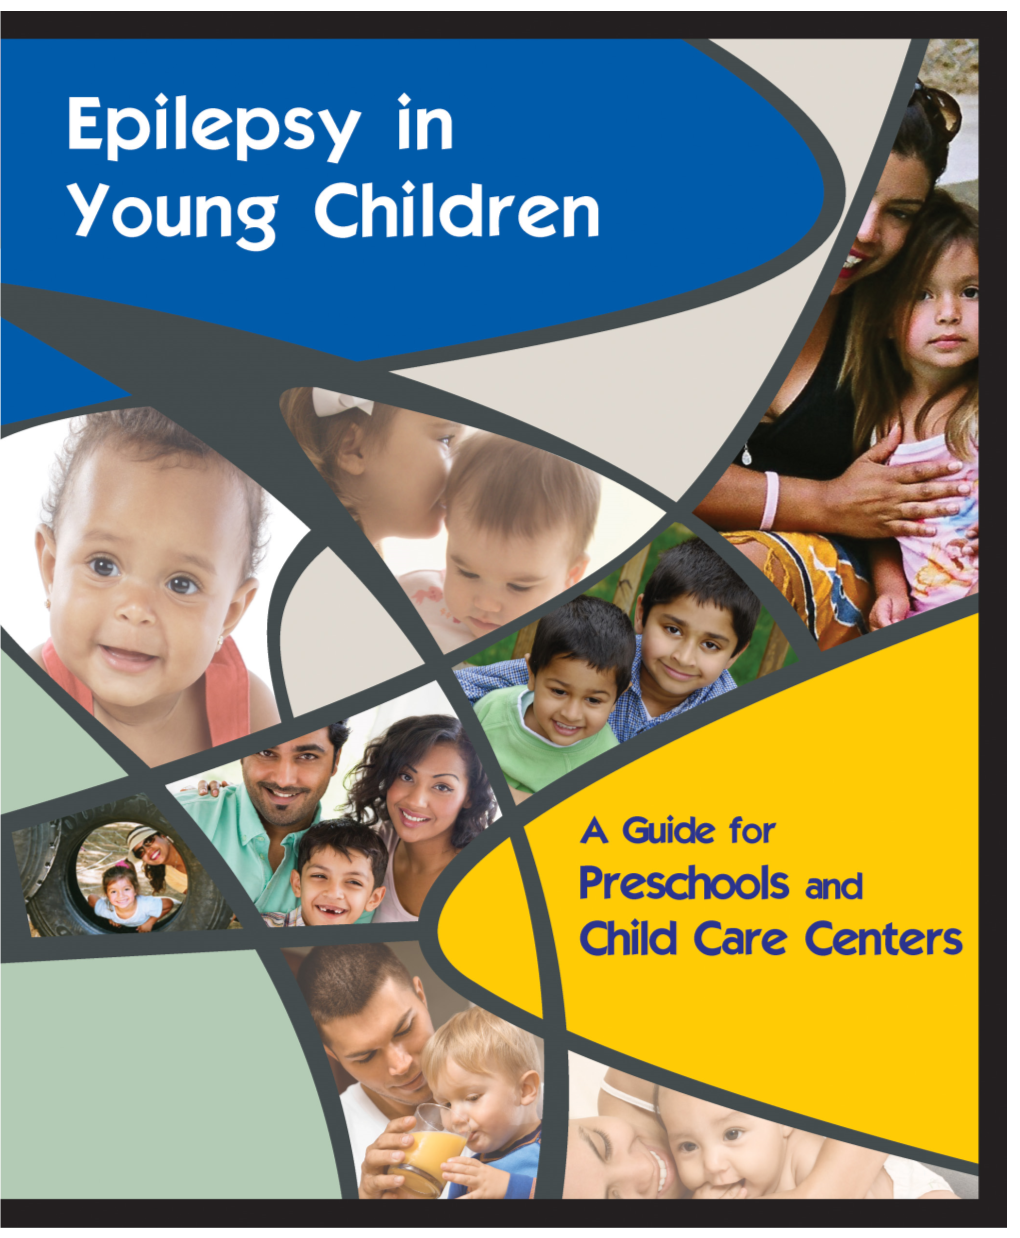 Epilepsy in Young Children: Guide for Preschools and Child